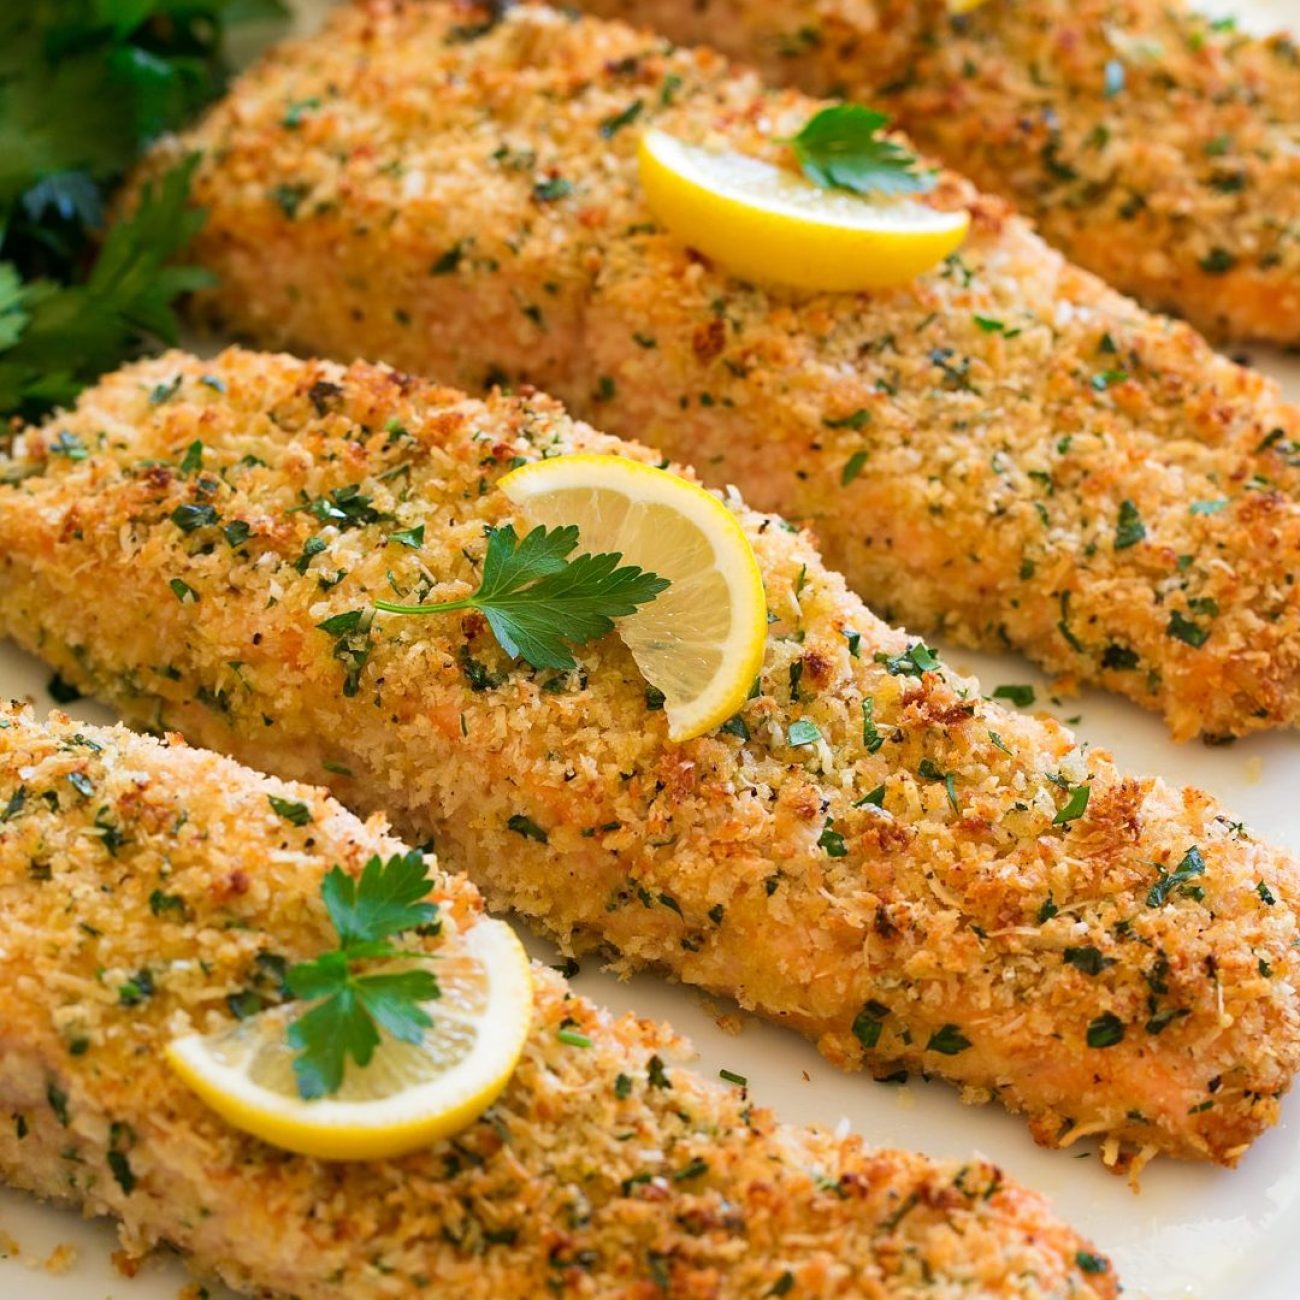 Parmesan Crusted & Baked Salmon